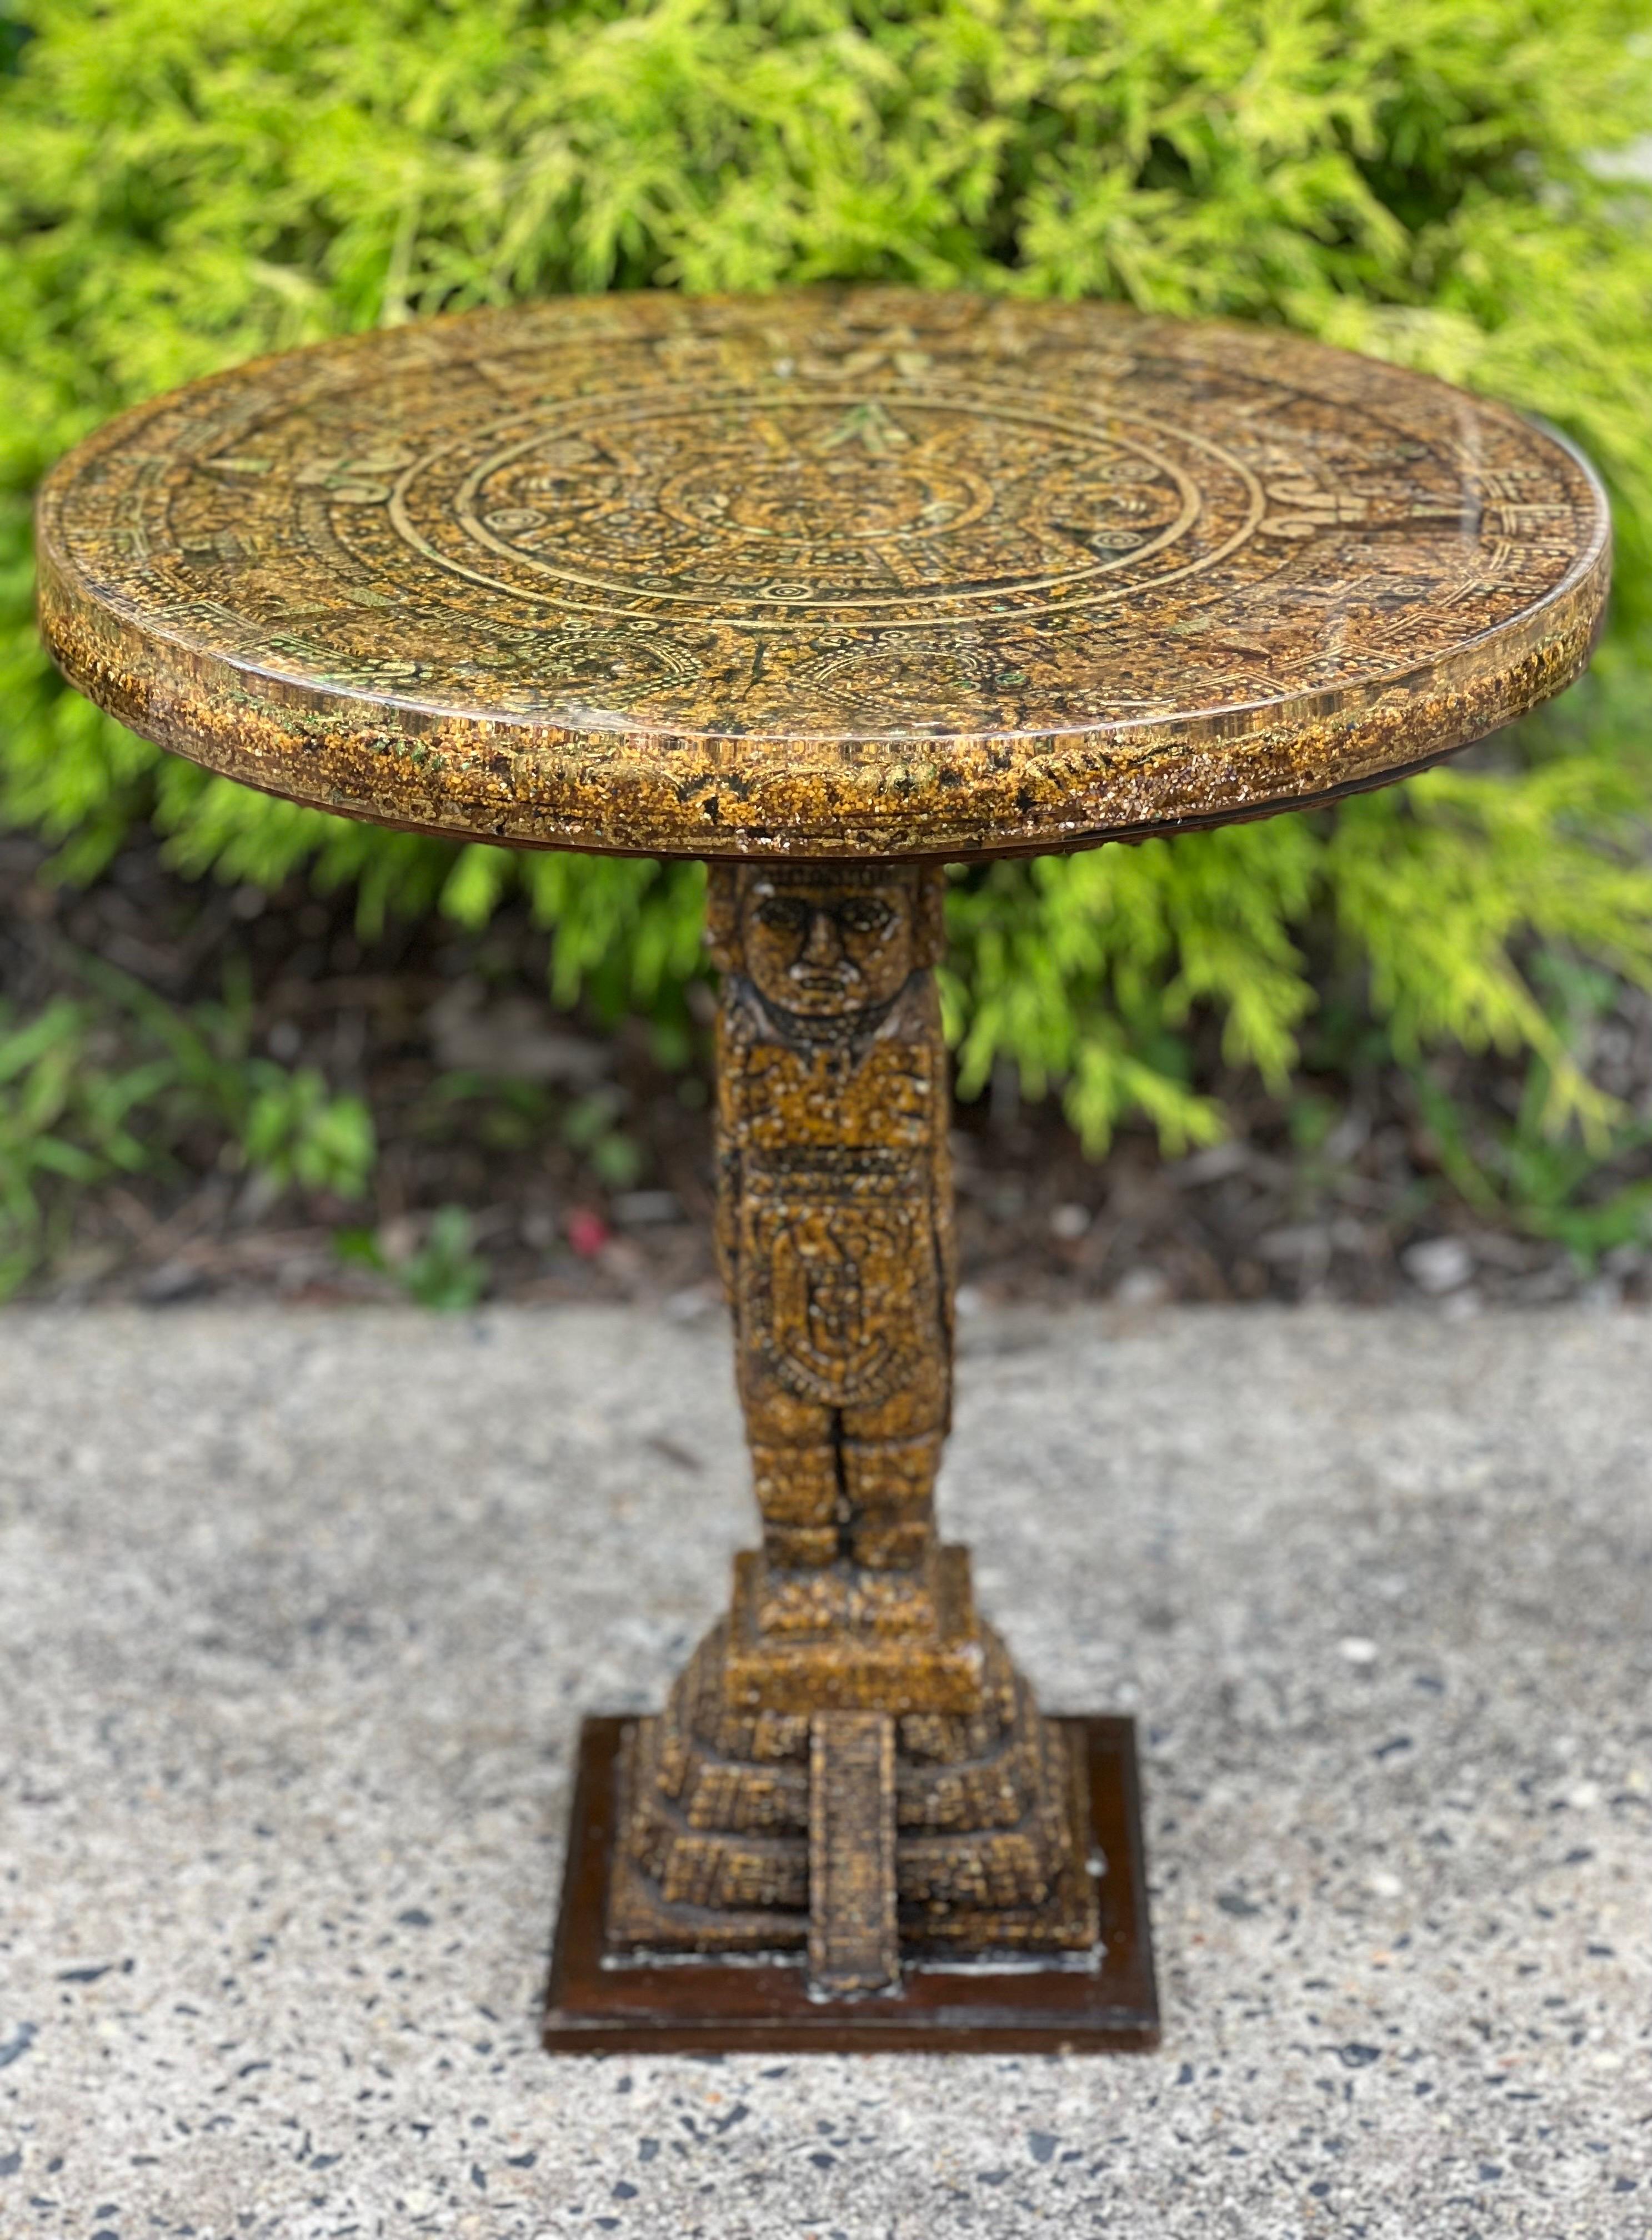 Vintage Aztec Sun Calendar Carved Stone Pedestal Table in Lucite, Mexico 7